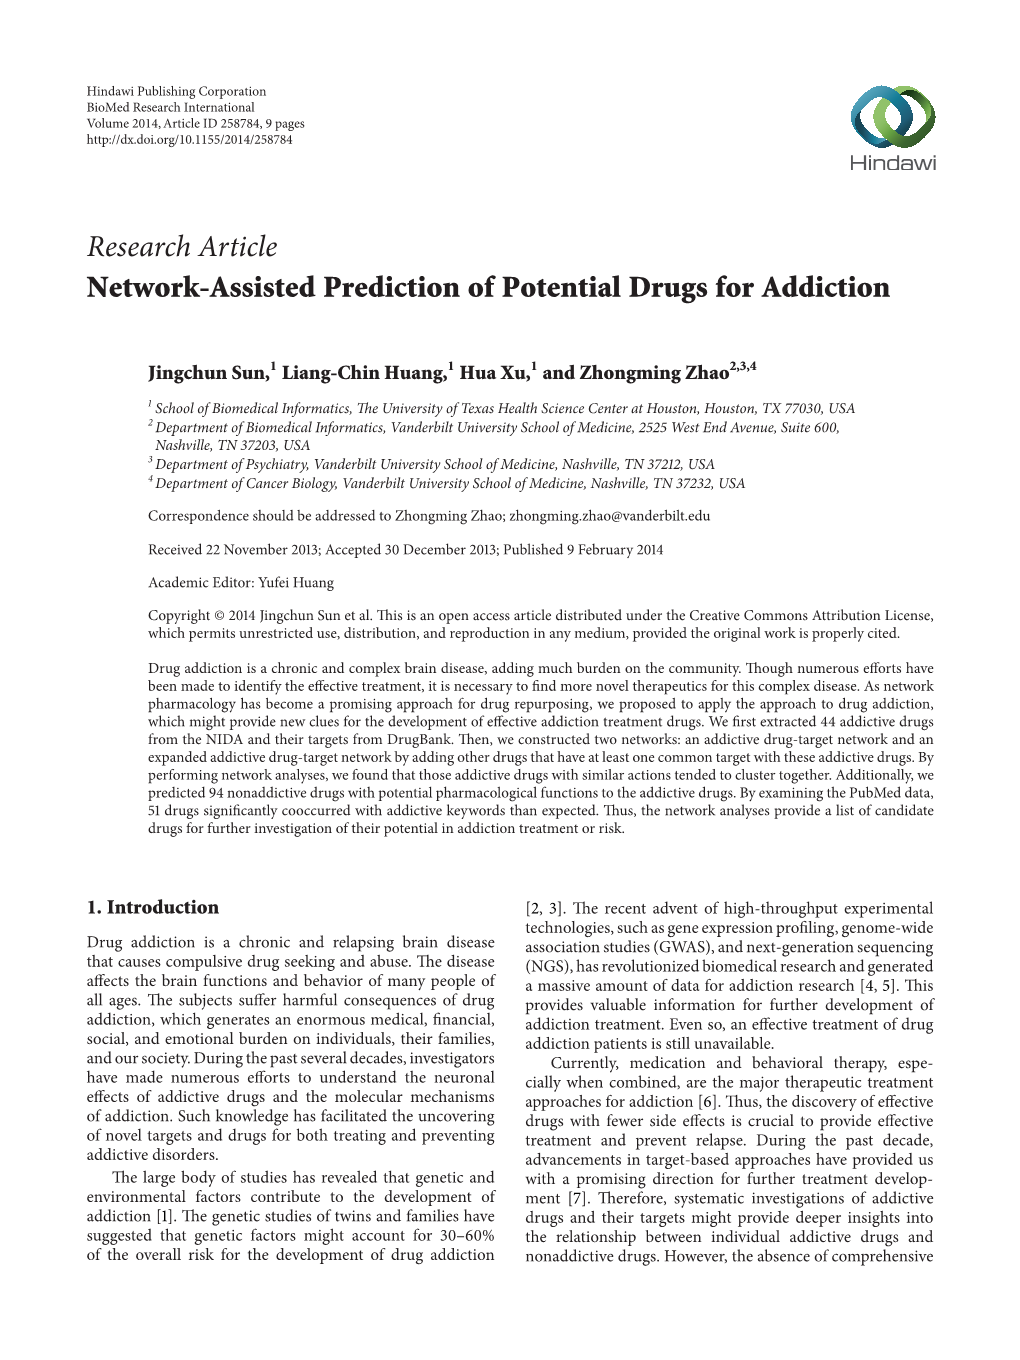 Network-Assisted Prediction of Potential Drugs for Addiction